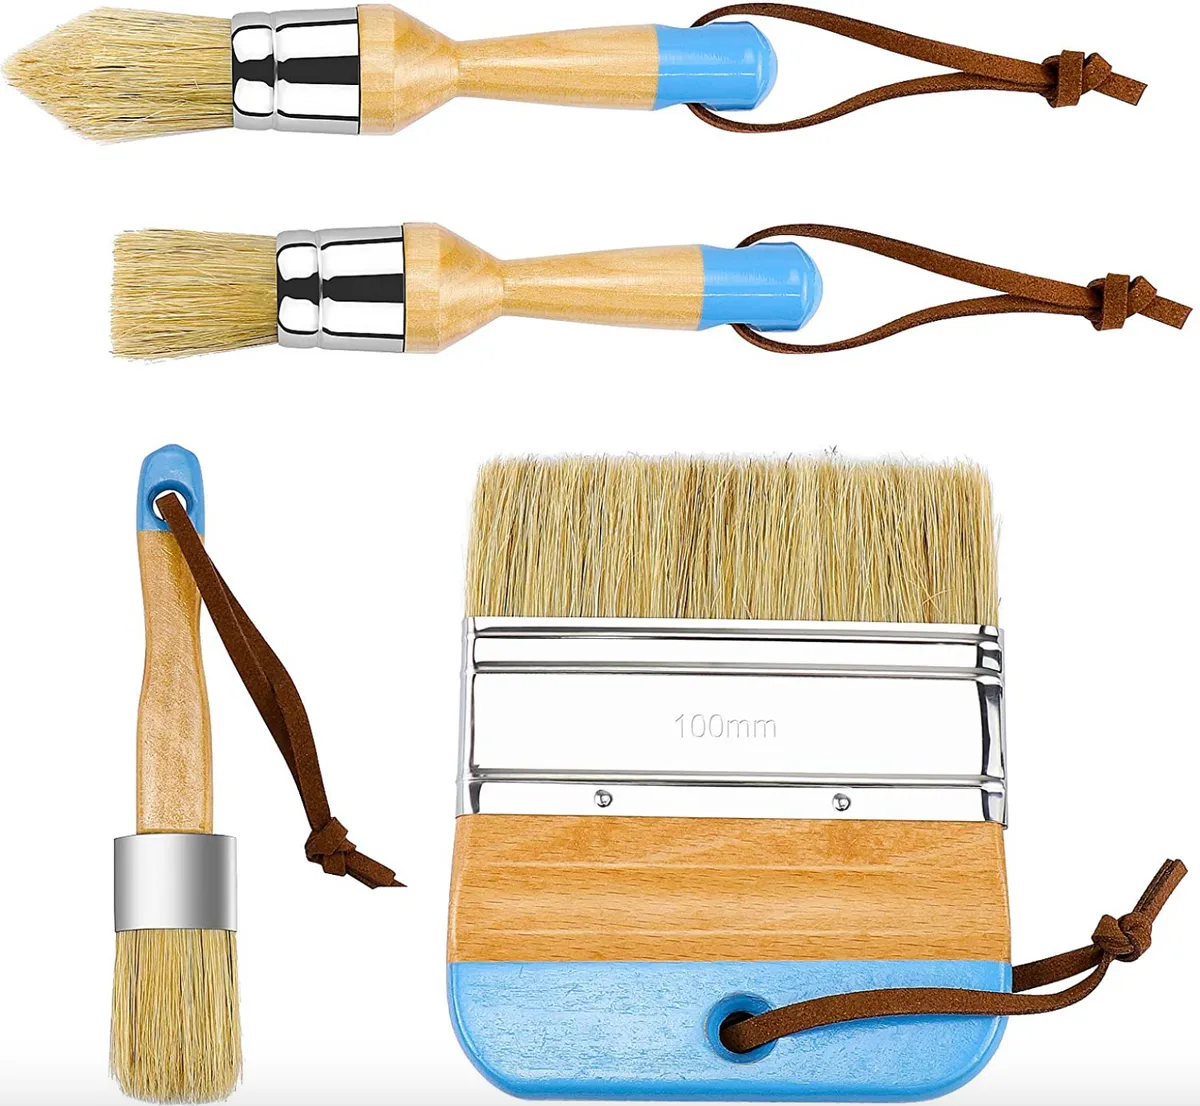 4 Pieces Chalk and Wax Paint Brushes,Reusable Flat and Round Chalked Paint  Brush Set with Bristles for Wood Furniture Home Decor DIY Painting (Blue)